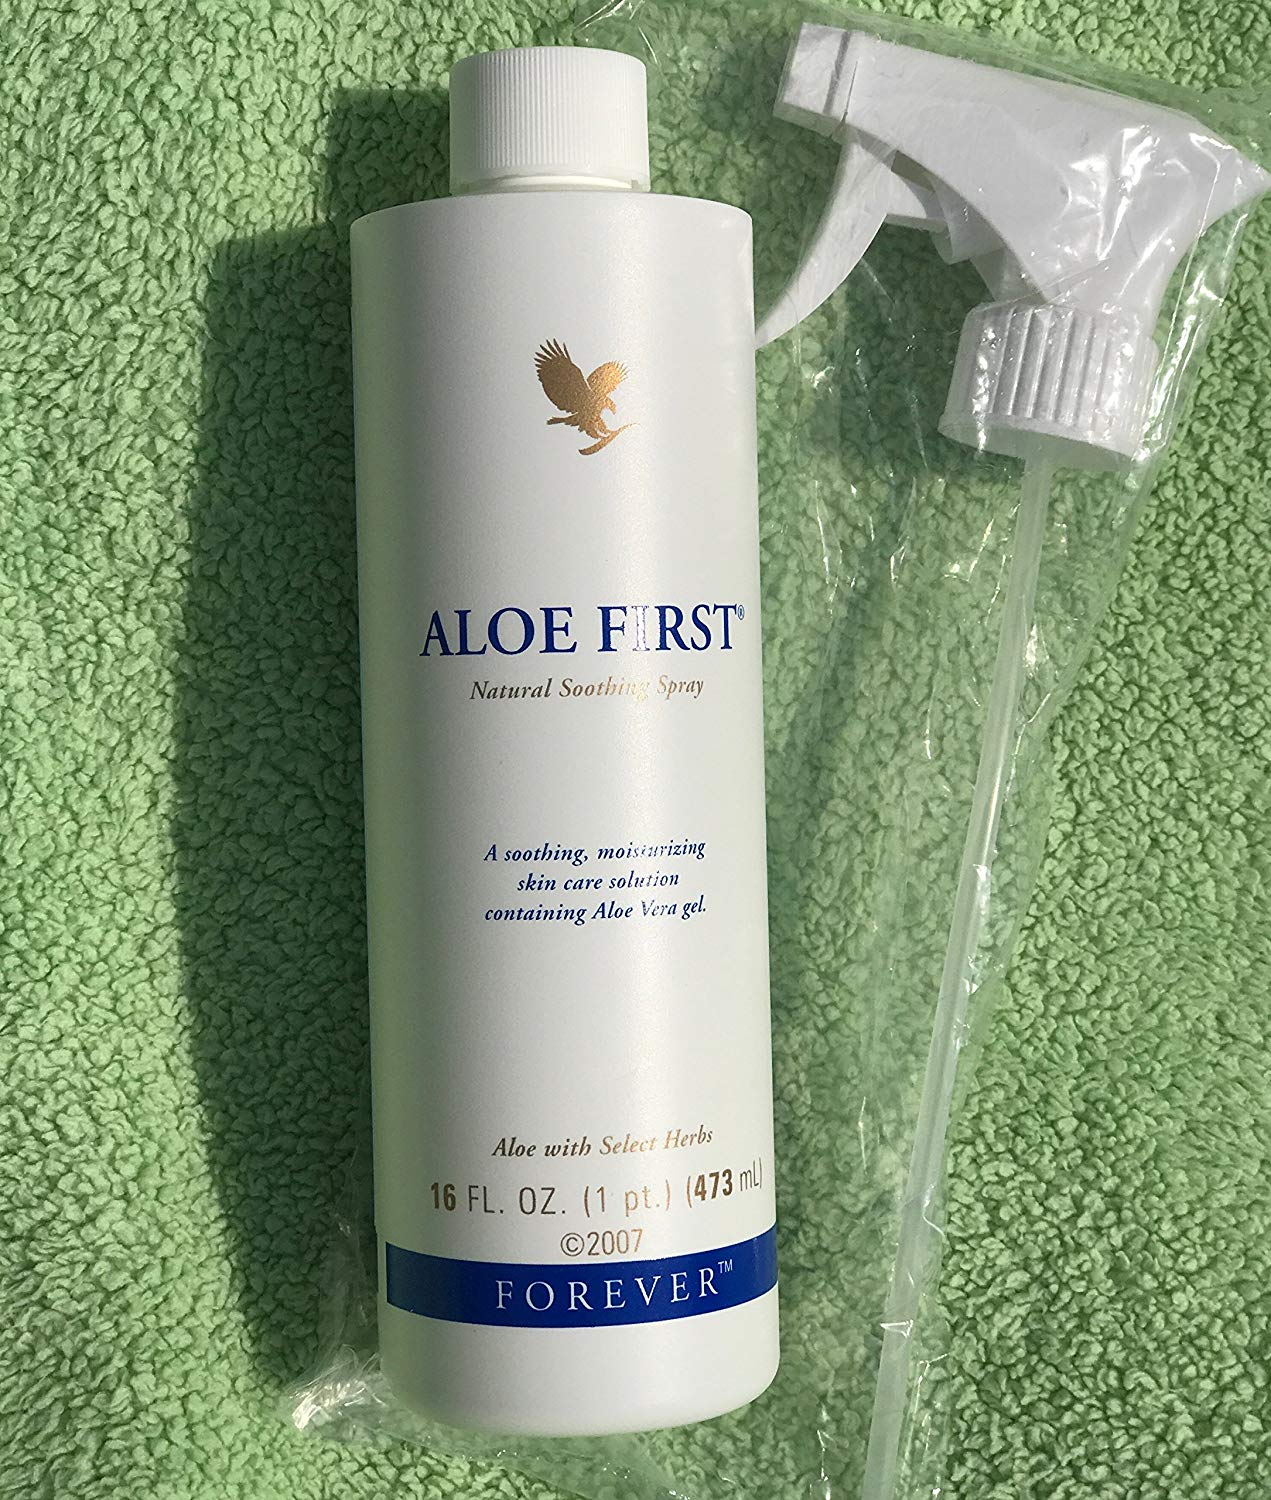 Aloe First Natural Soothing Spray, 16 FL. OZ …